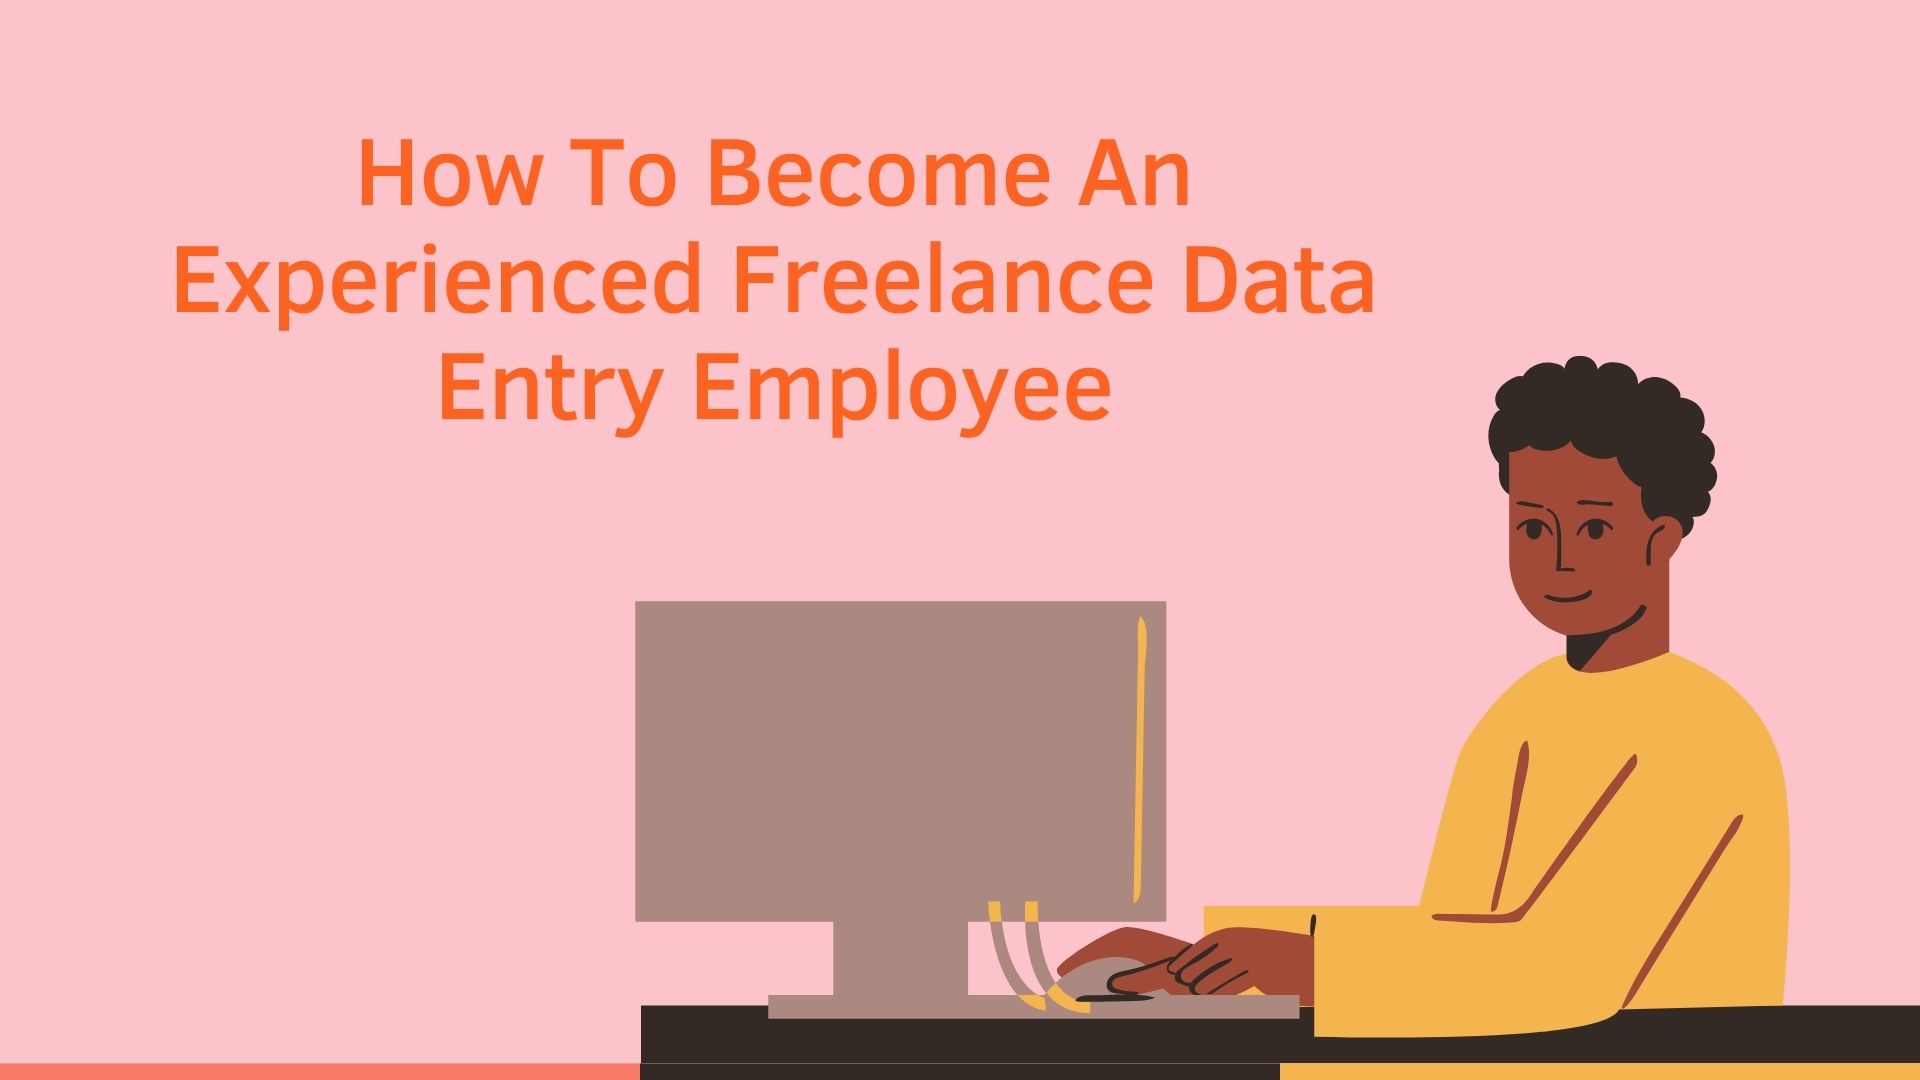 How To Become An Experienced Freelance Data Entry Employee